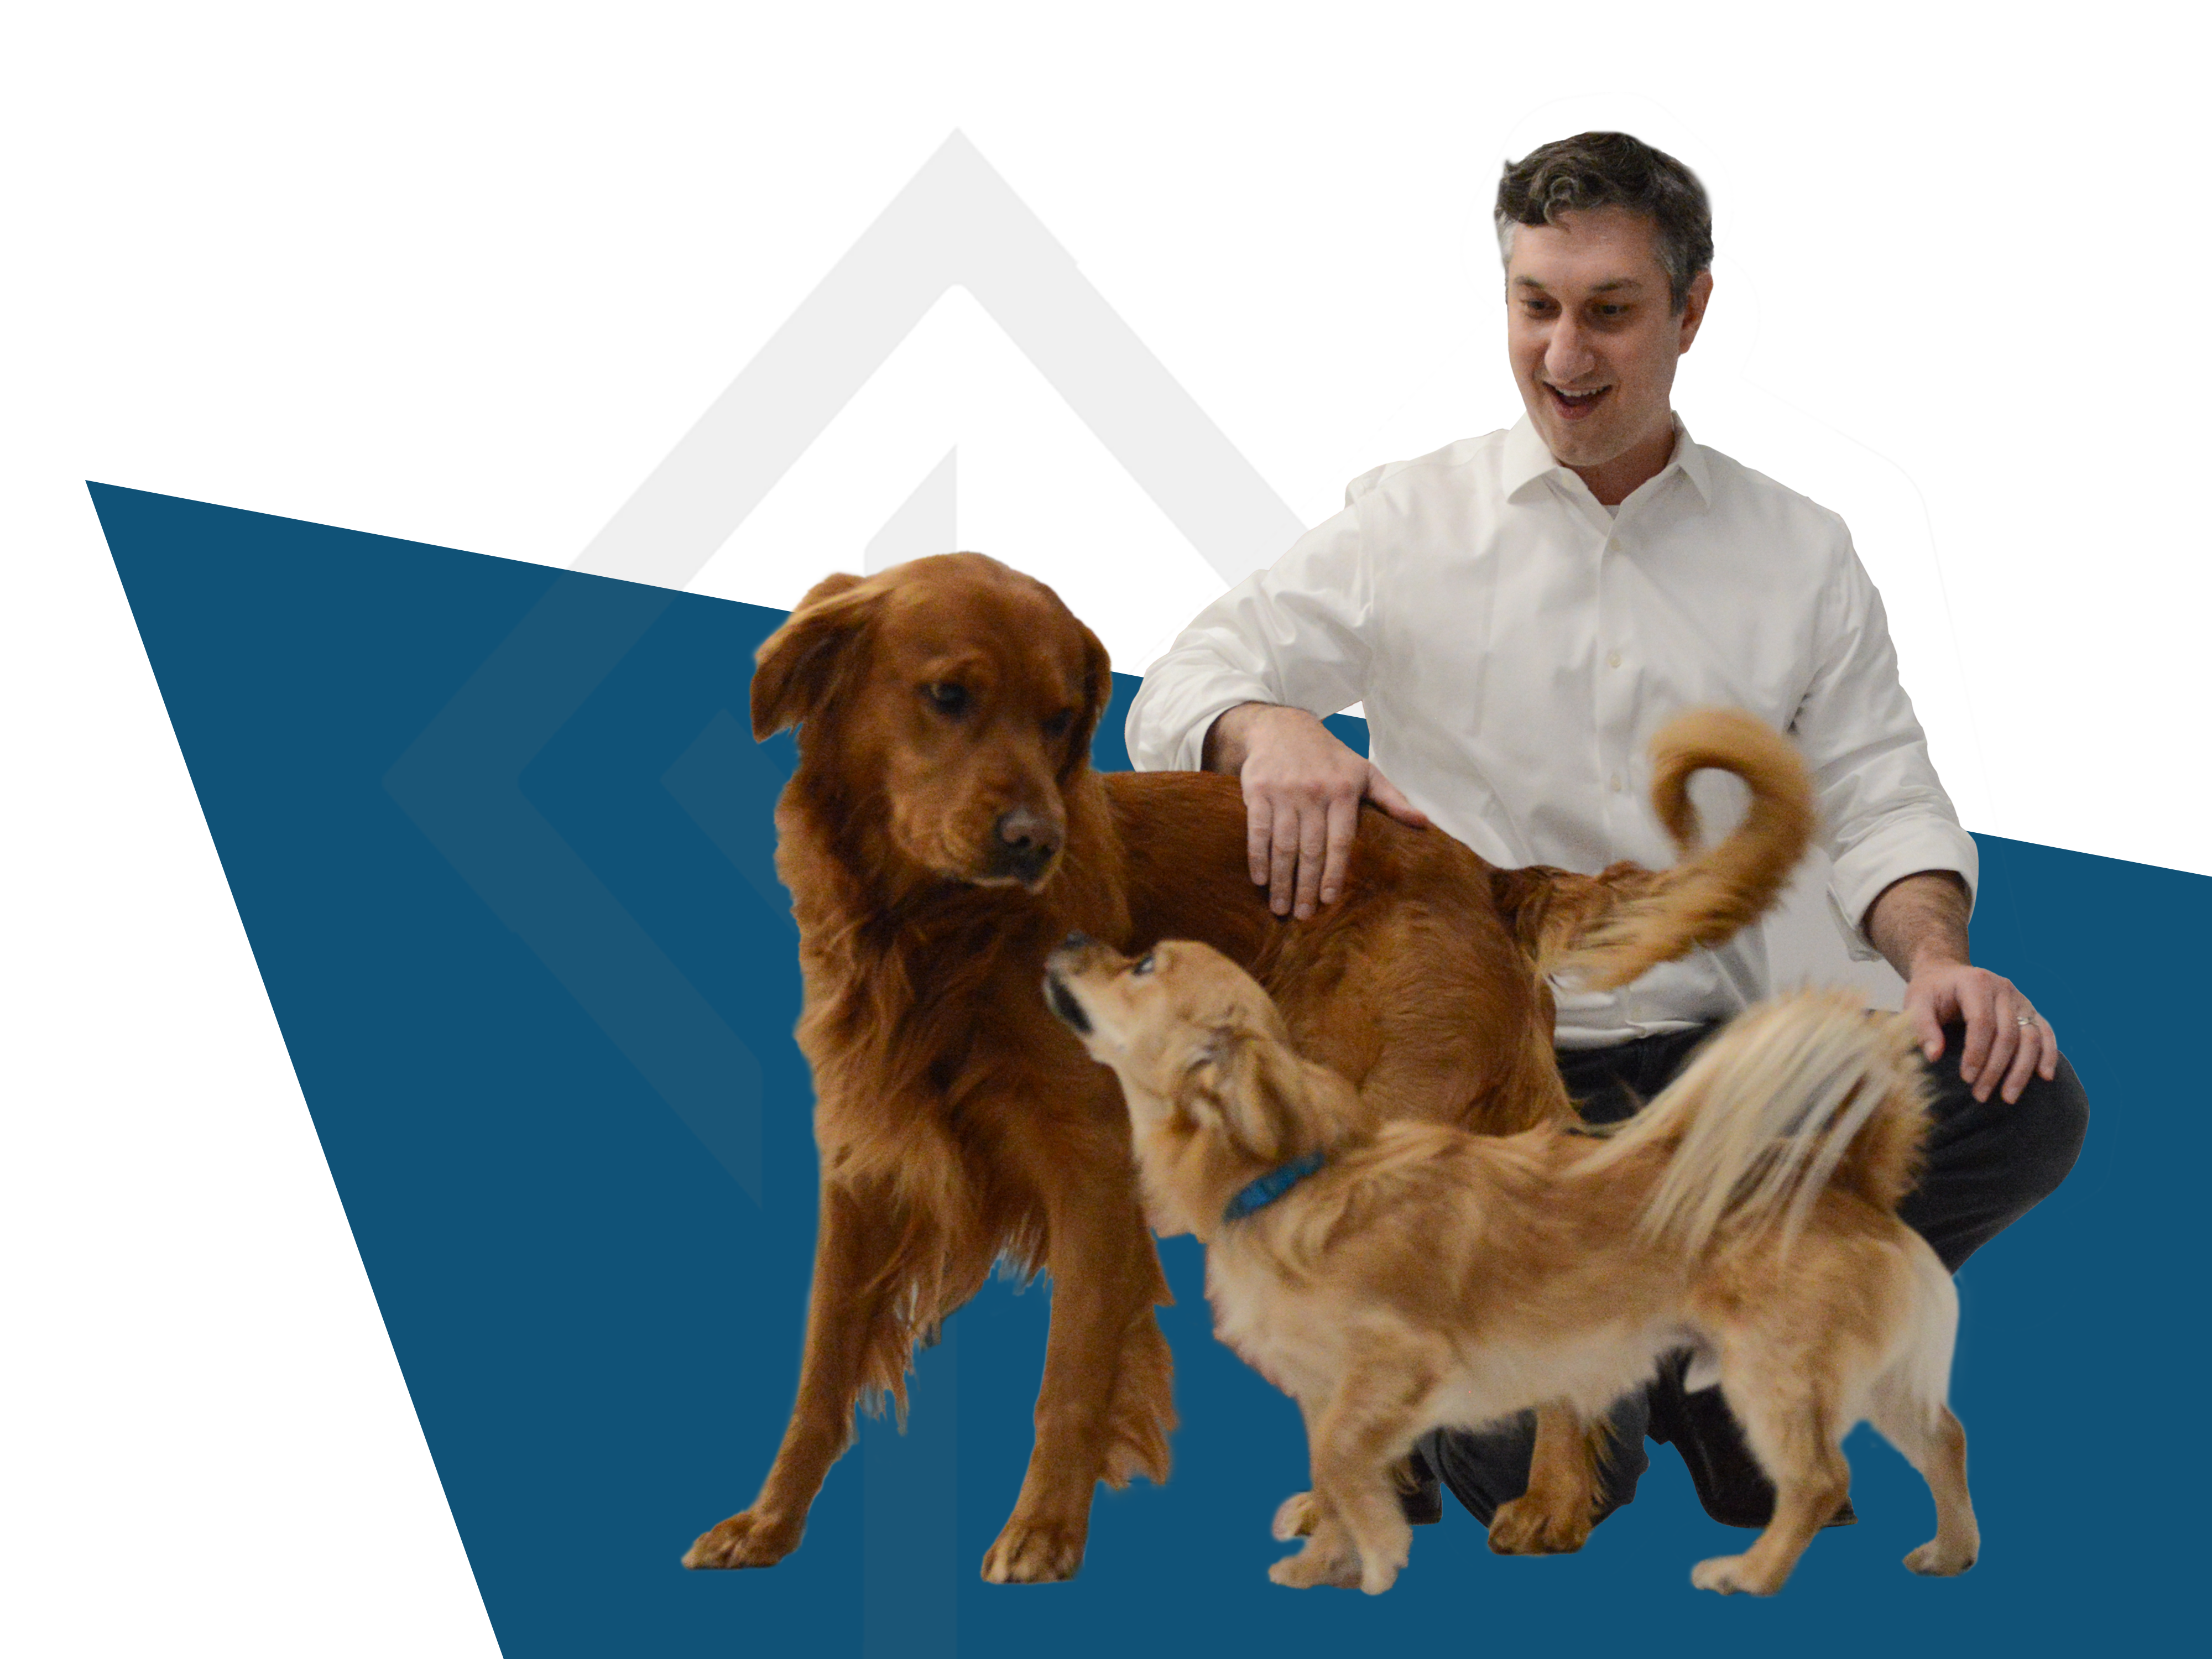 Dave Weishaus from Boxelder Consulting, and the Boxelder Therapy dogs are here to help.